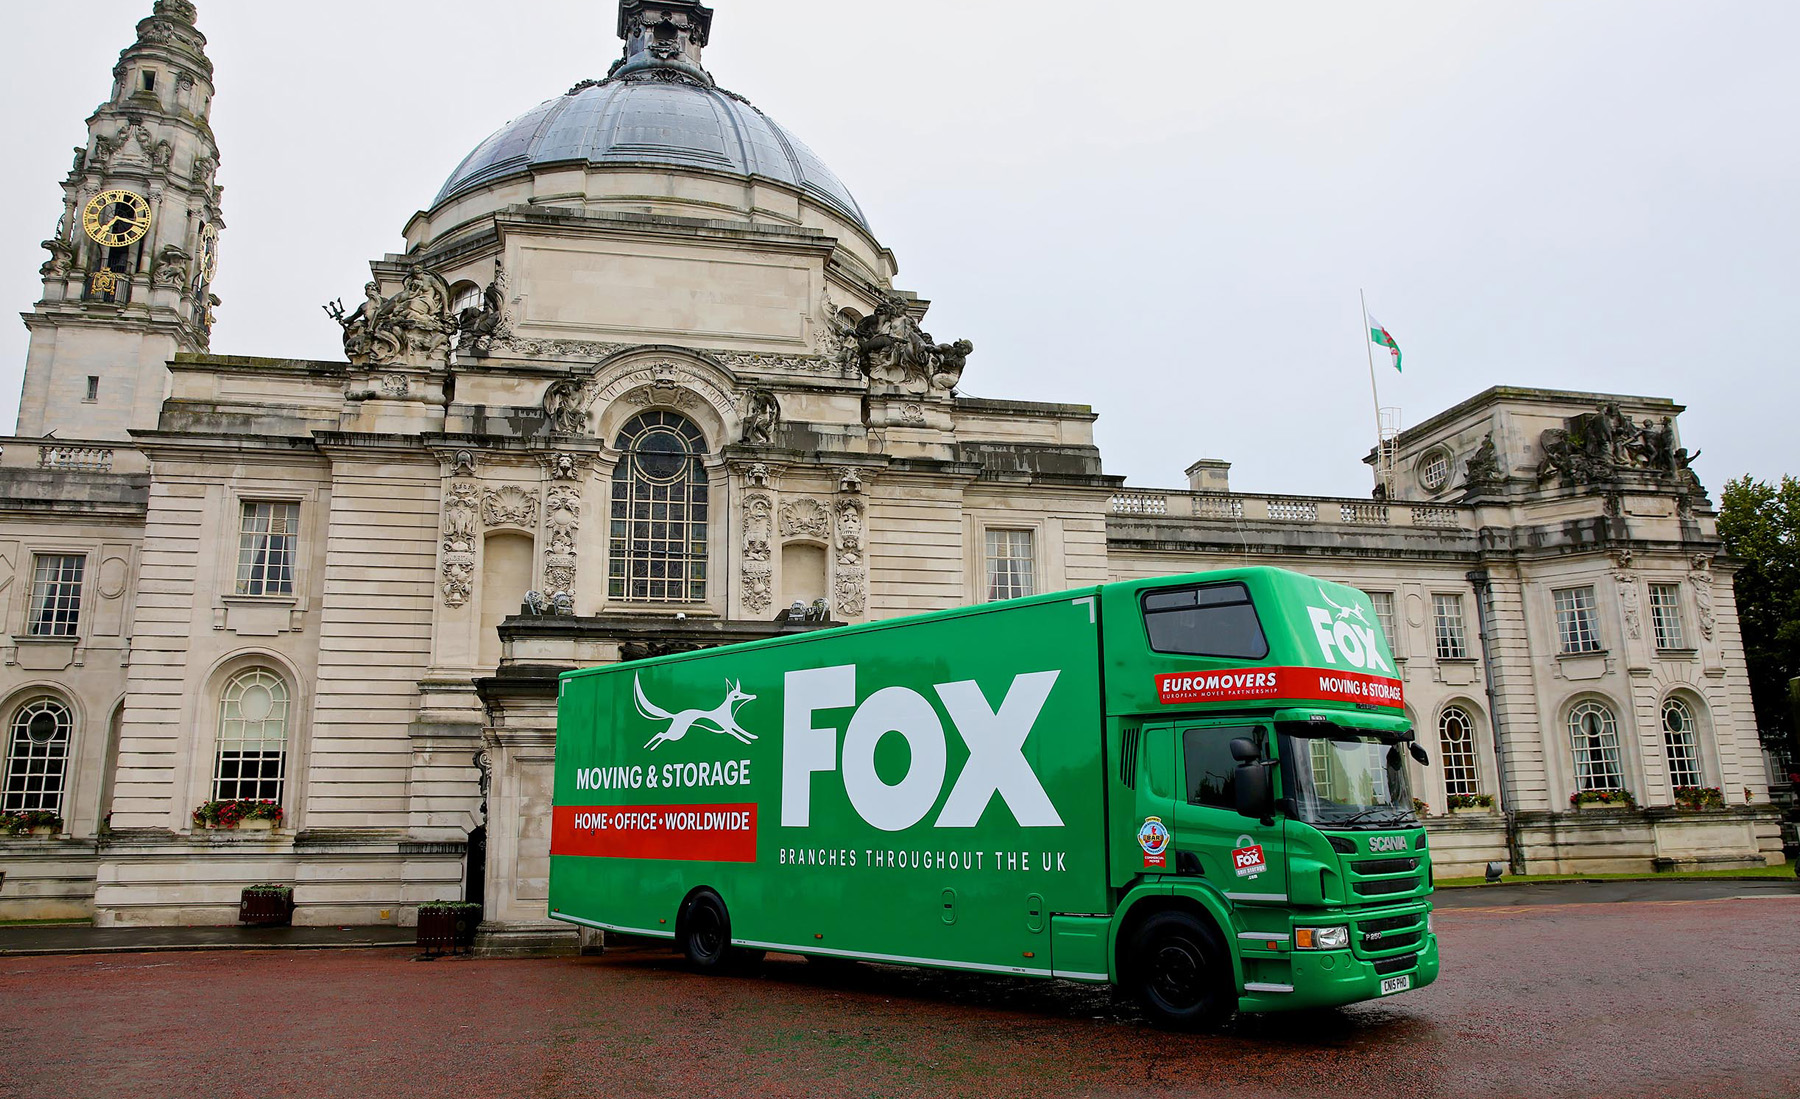 fox moving and storage van outside a heritage building